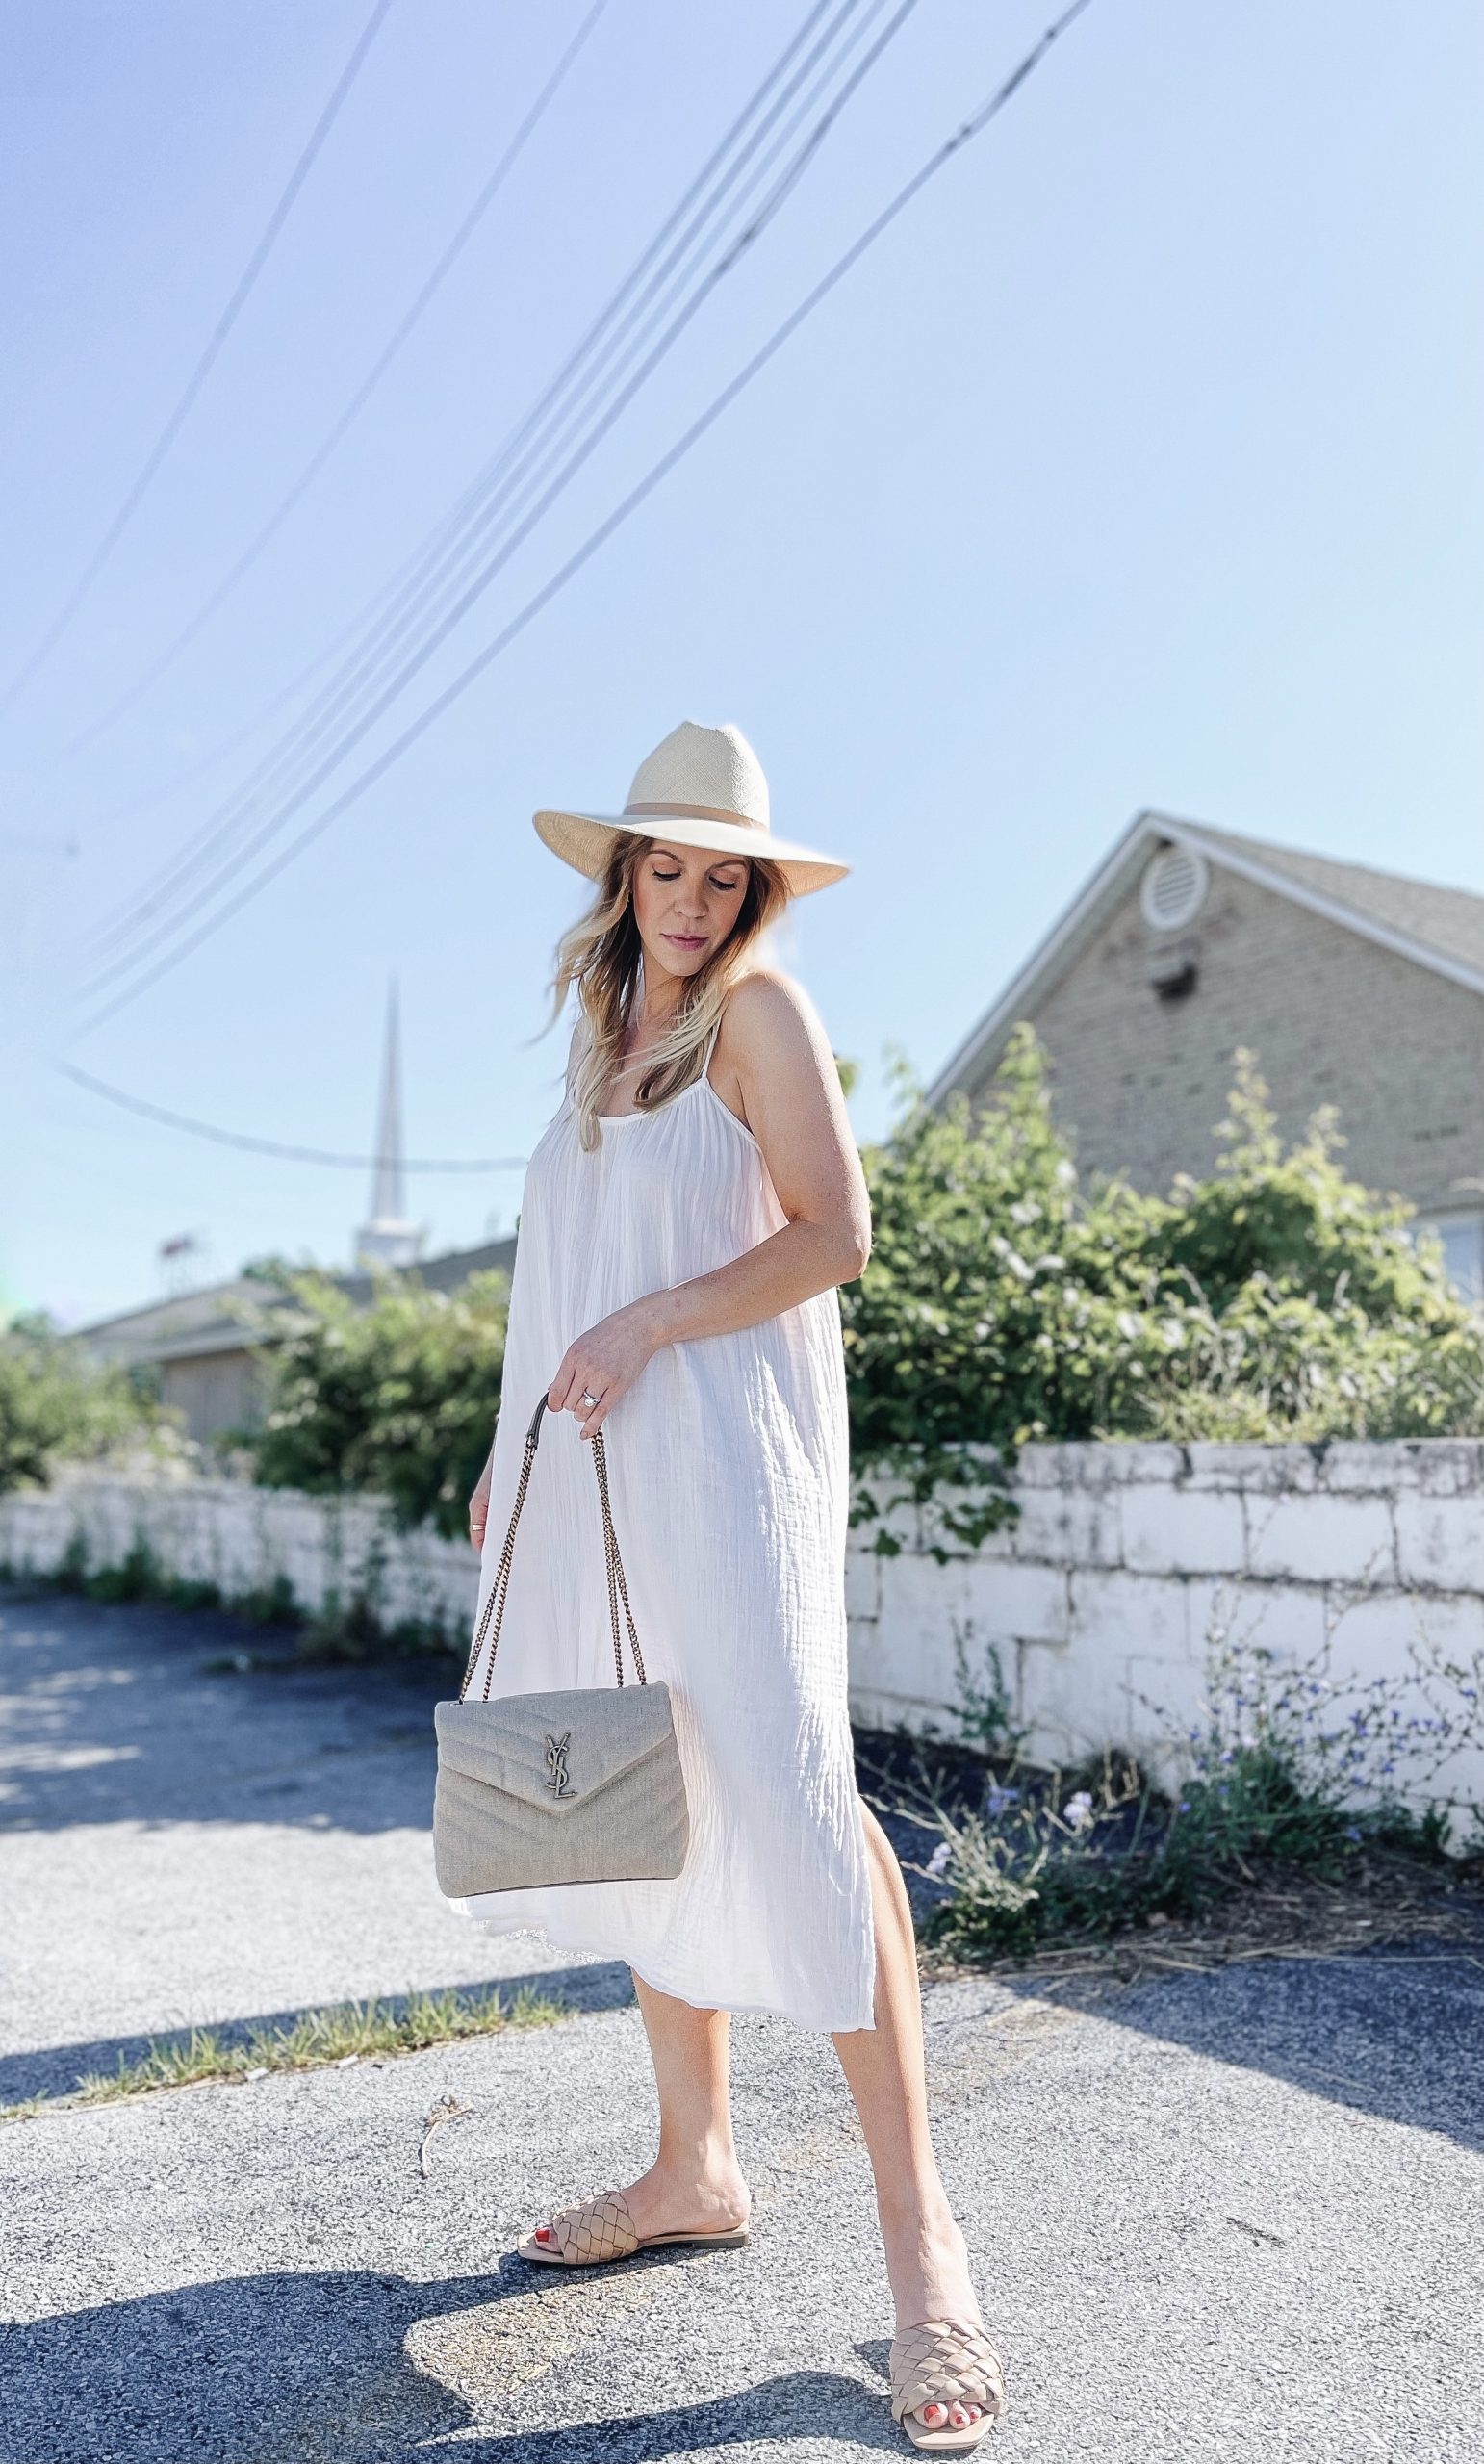 https://www.meagansmoda.com/wp-content/uploads/2021/07/Meagan-Brandon-of-Meagans-Moda-shares-tips-for-postpartum-style-flattering-clothing-and-dresses-scaled.jpg